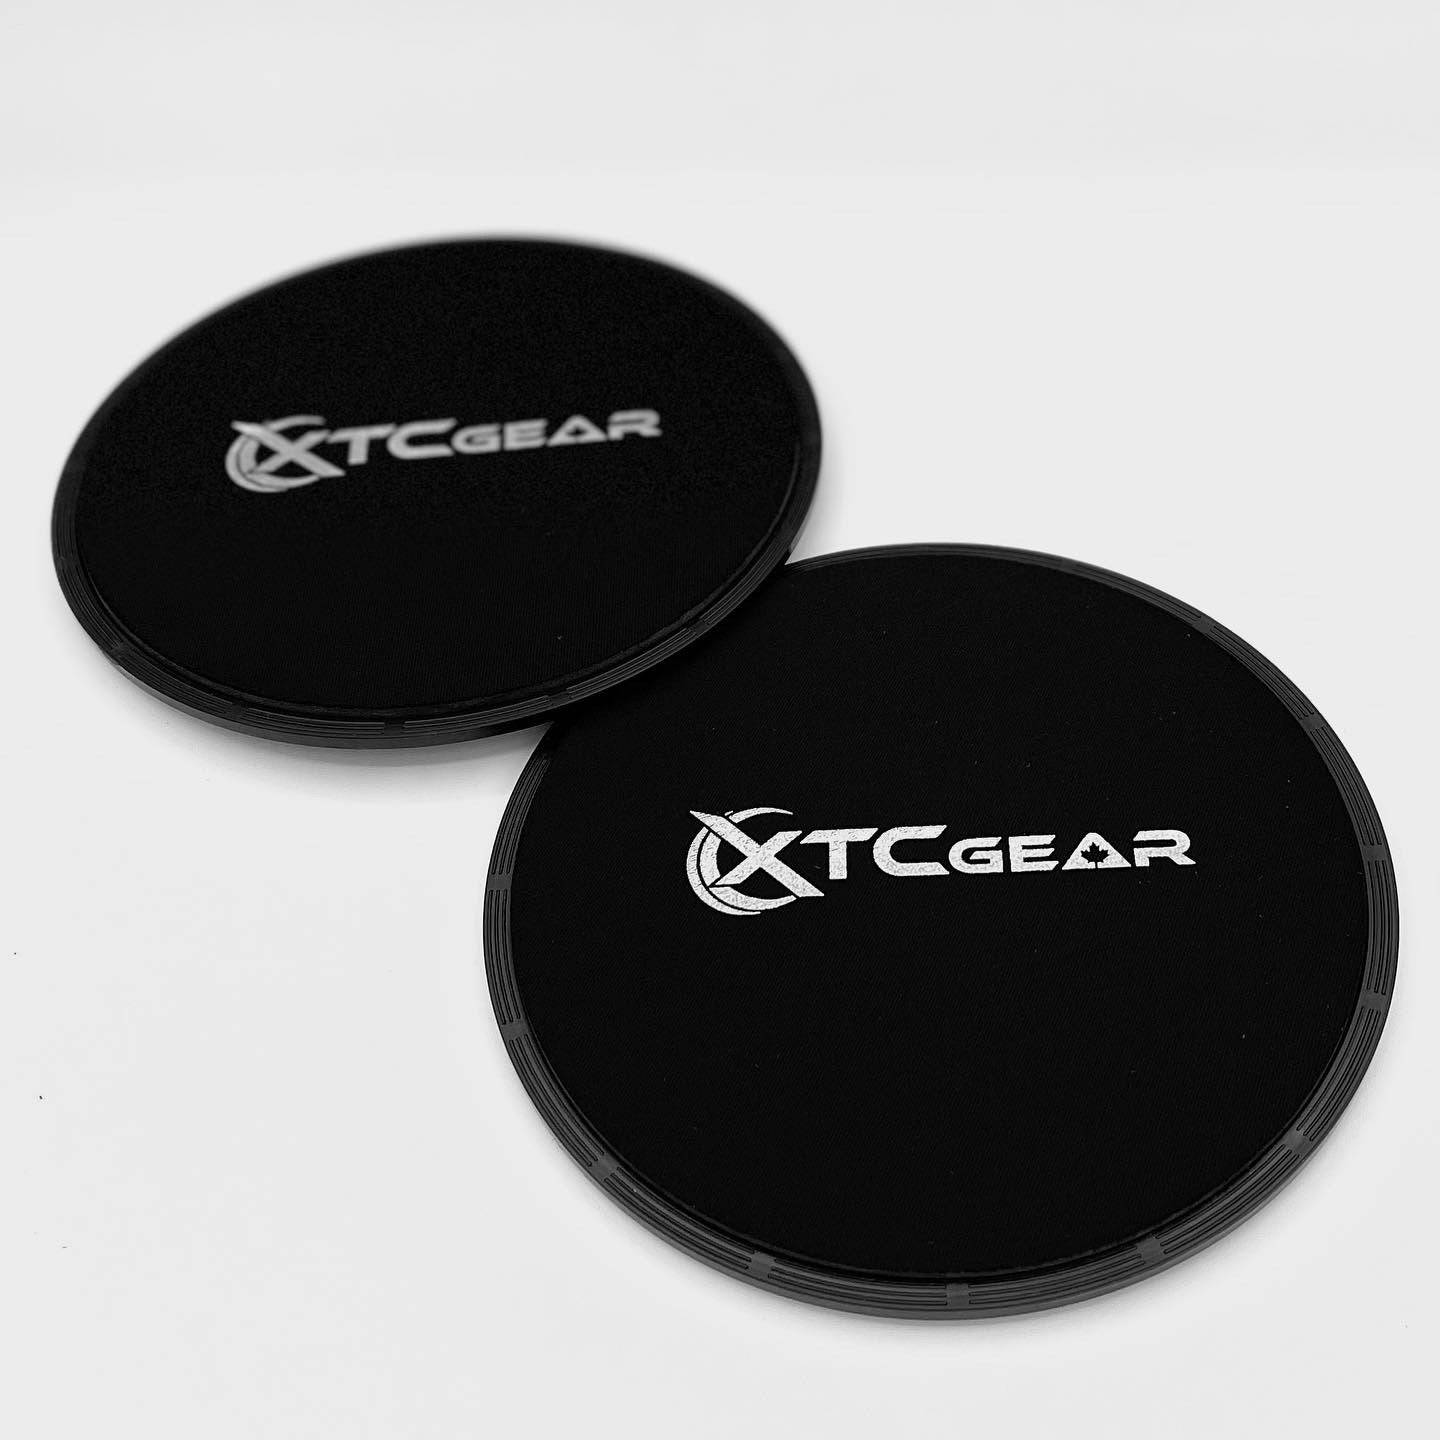 XTC Gear | X-Series Gliding Discs - XTC Fitness - Exercise Equipment Superstore - Canada - Glide Discs